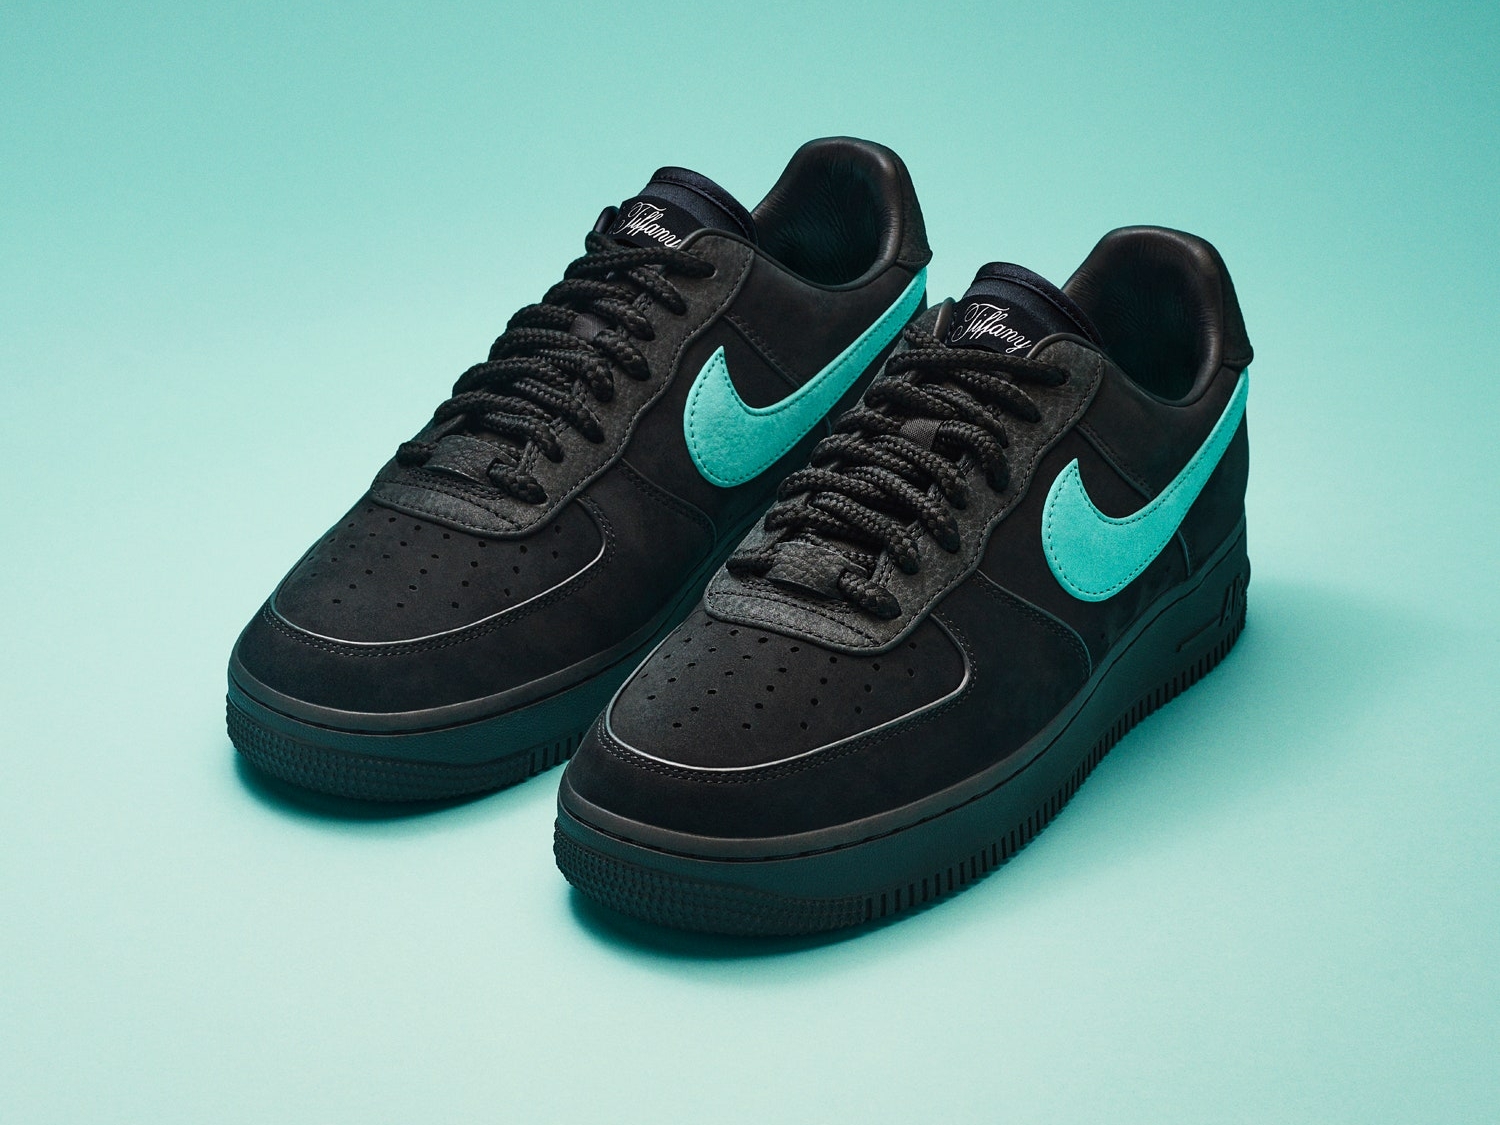 Nike x Tiffany & Co to release Air Force 1 1837 trainers in March